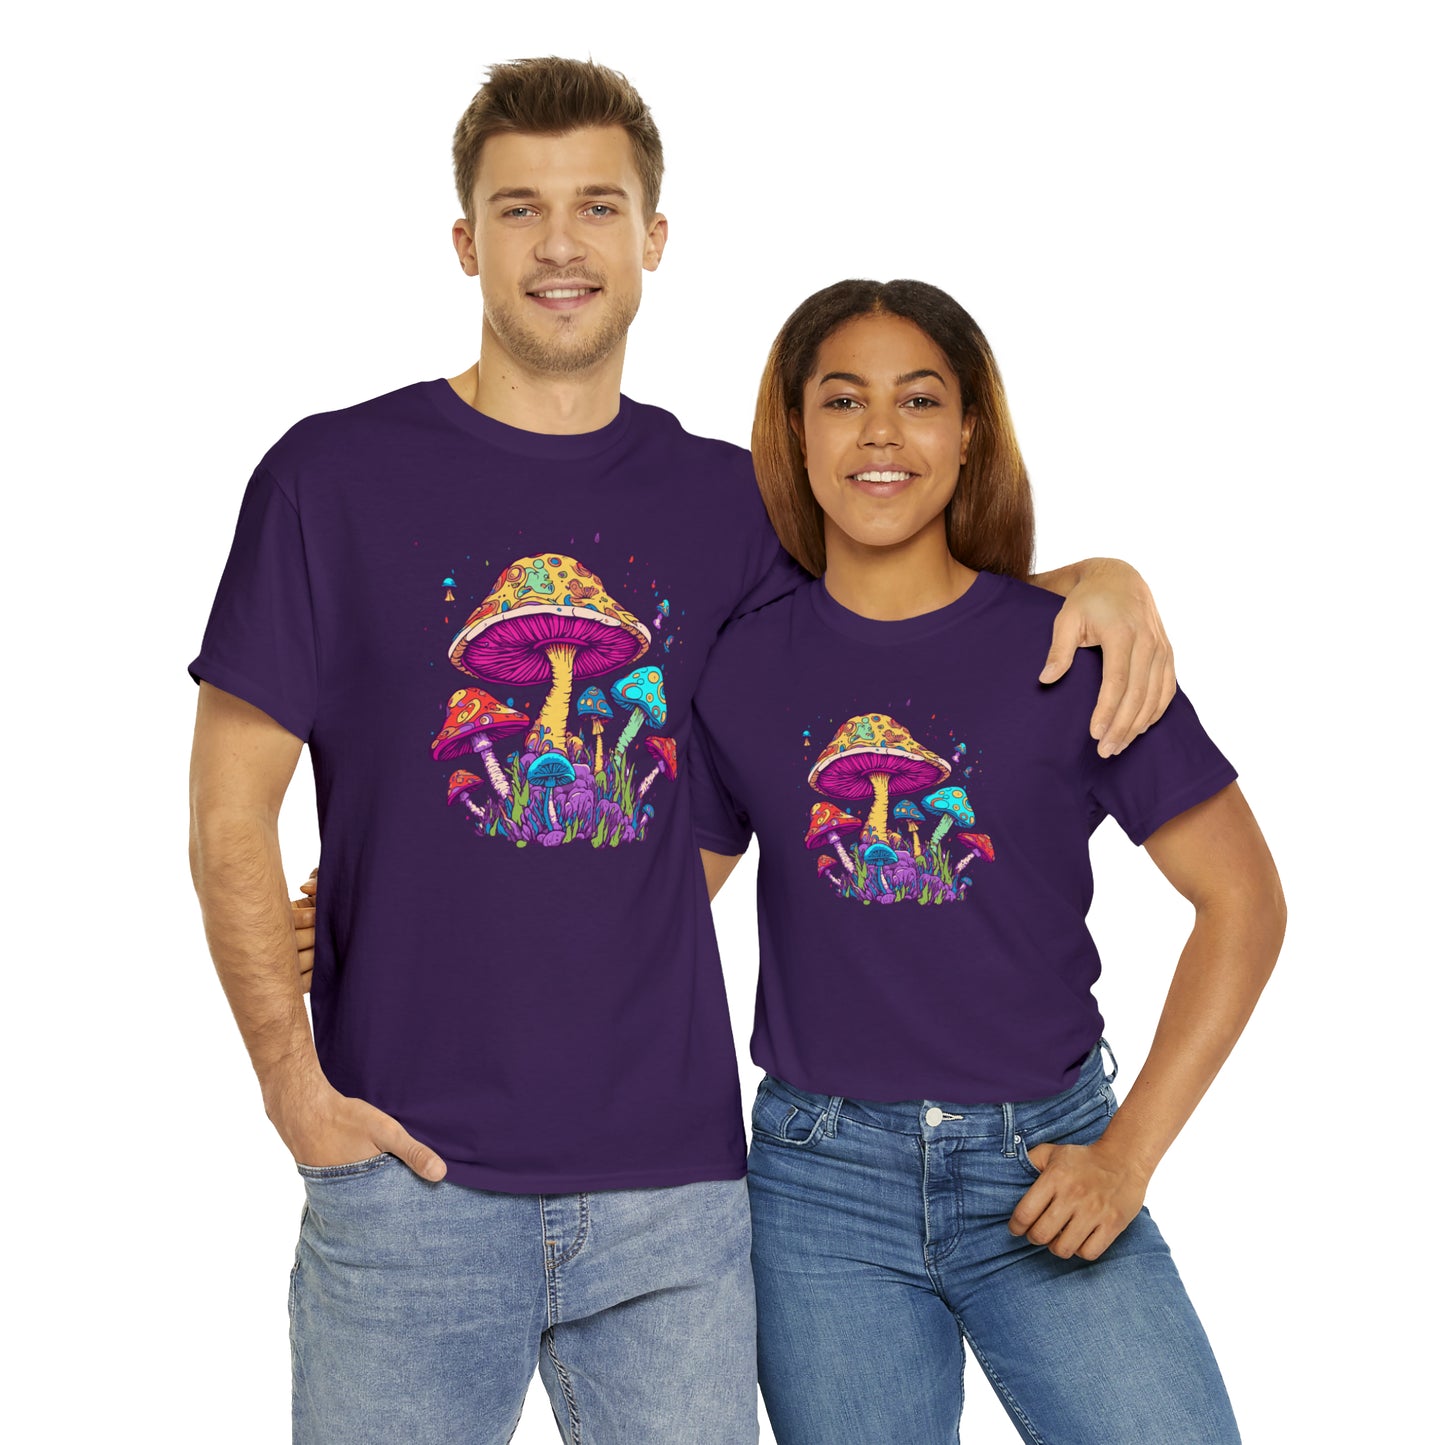 Mushrooms T-Shirt With Psychedelic Mushrooms TShirt For Neon Shrooms T Shirt With Colorful Mushrooms Tee For Hippy Shirt For Groovy Fungi Shirt